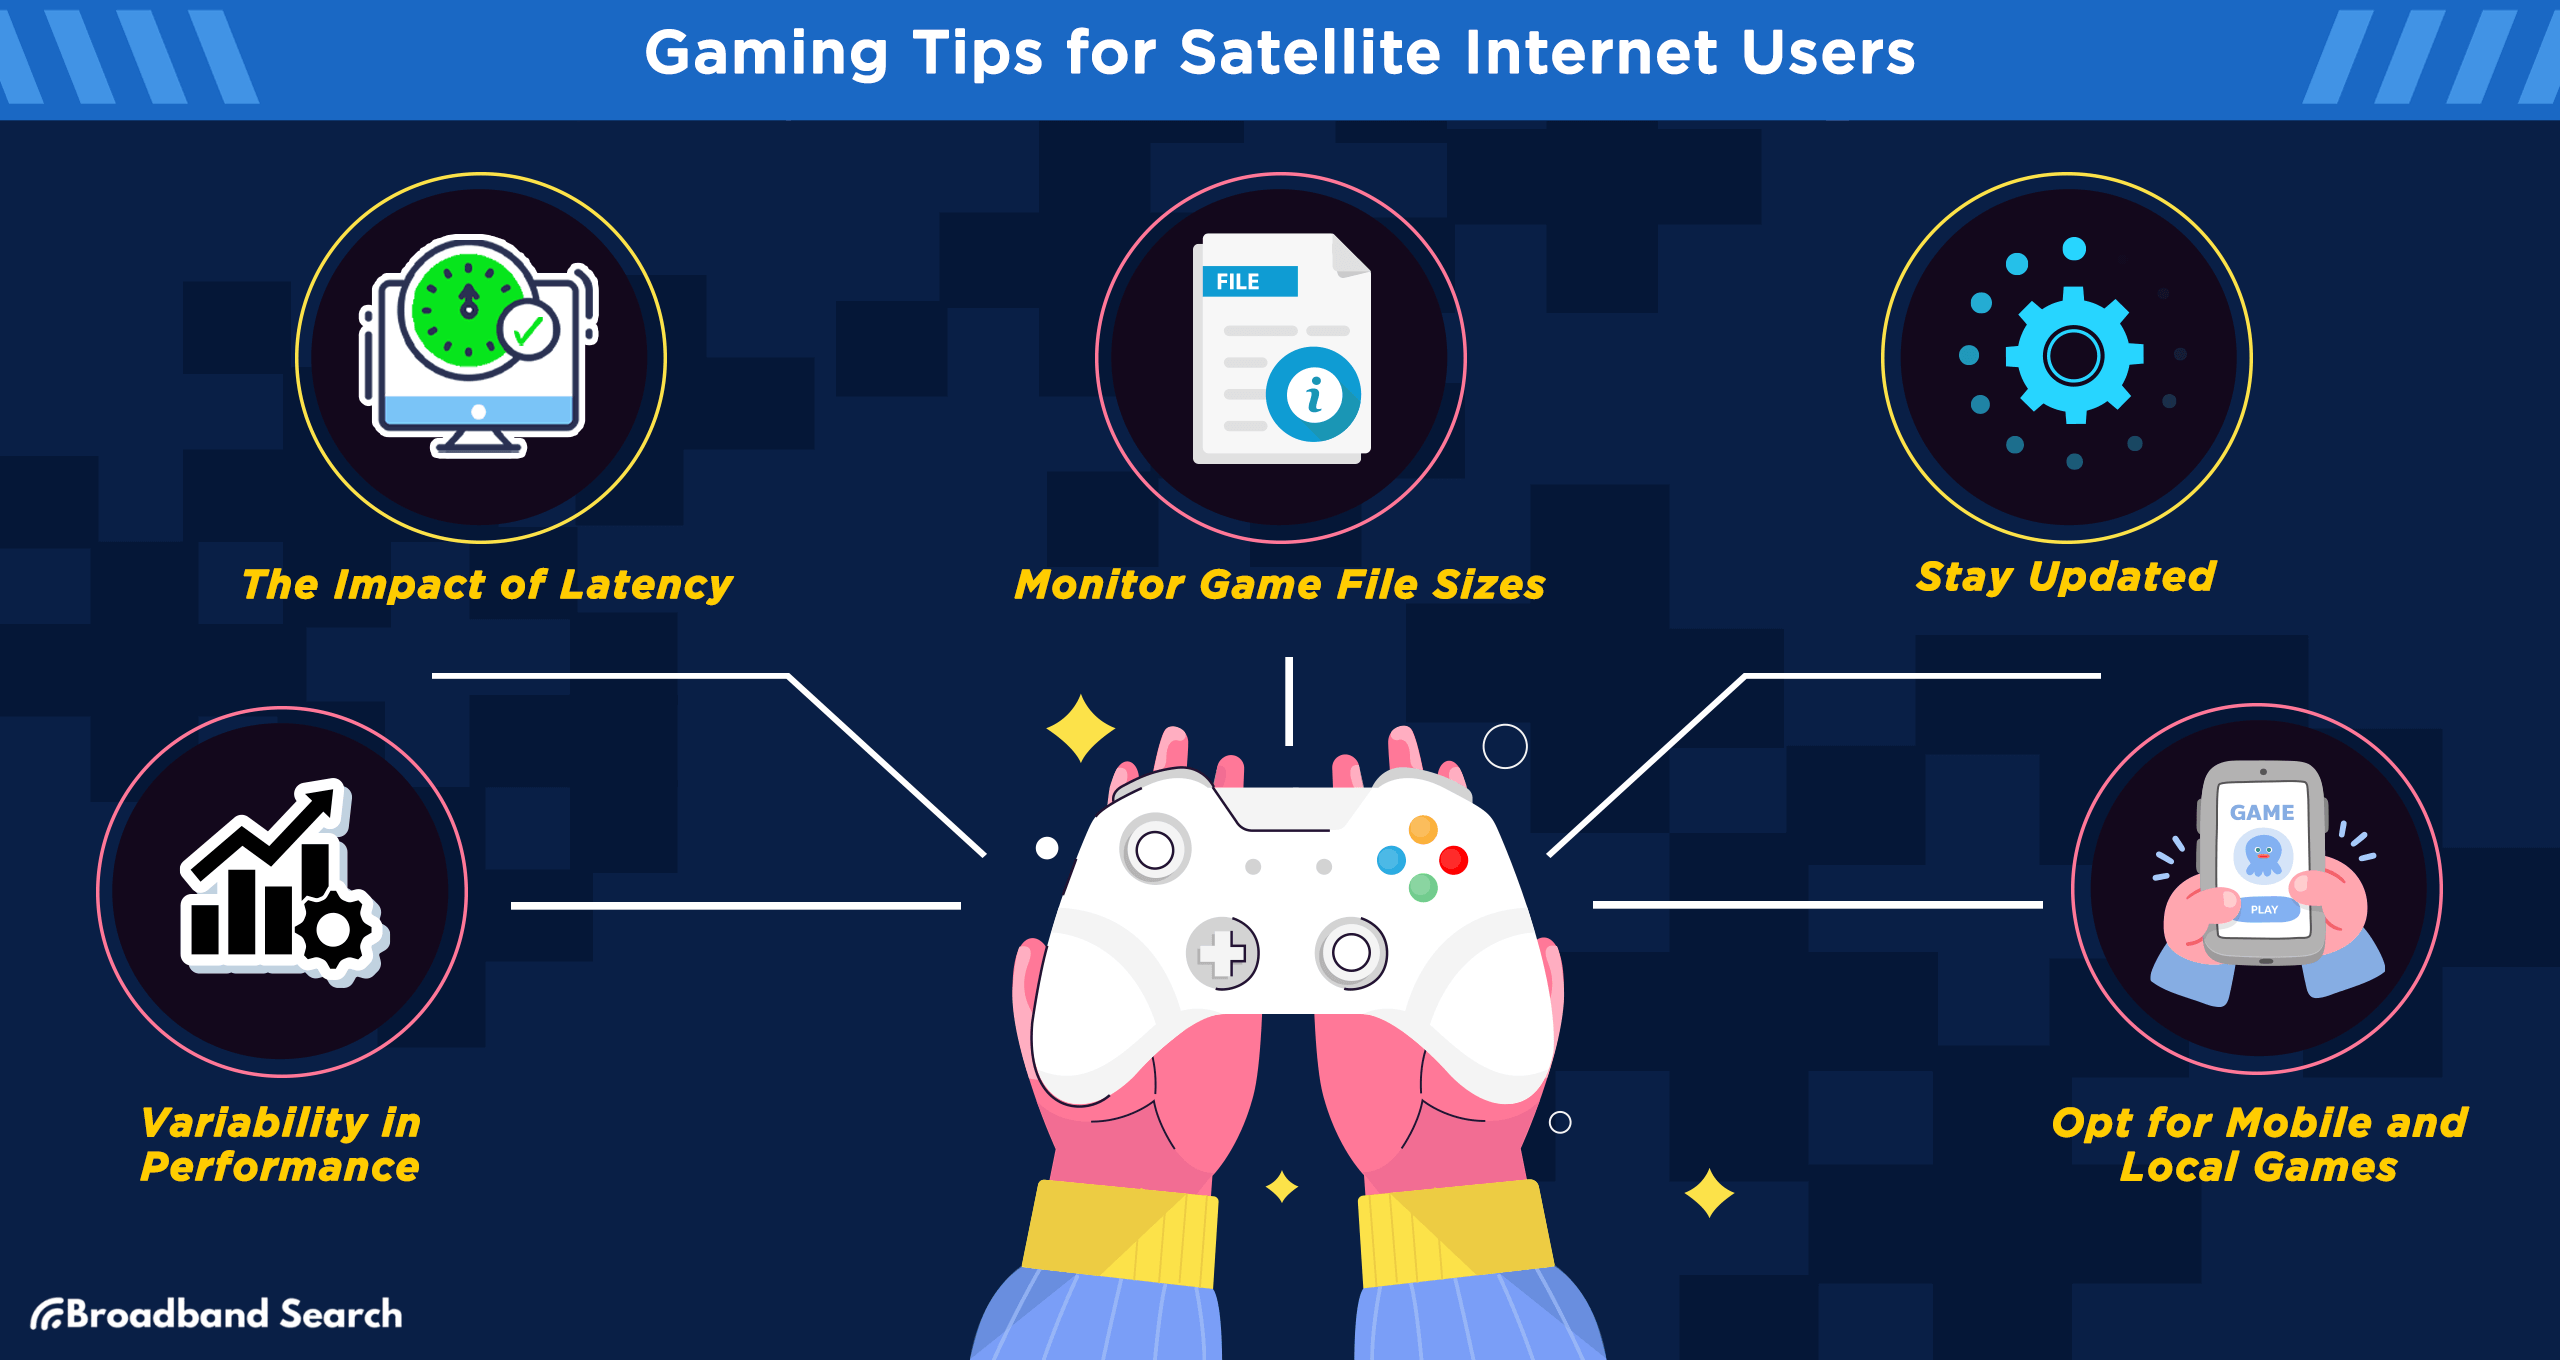 Gaming tips for satellite internet users